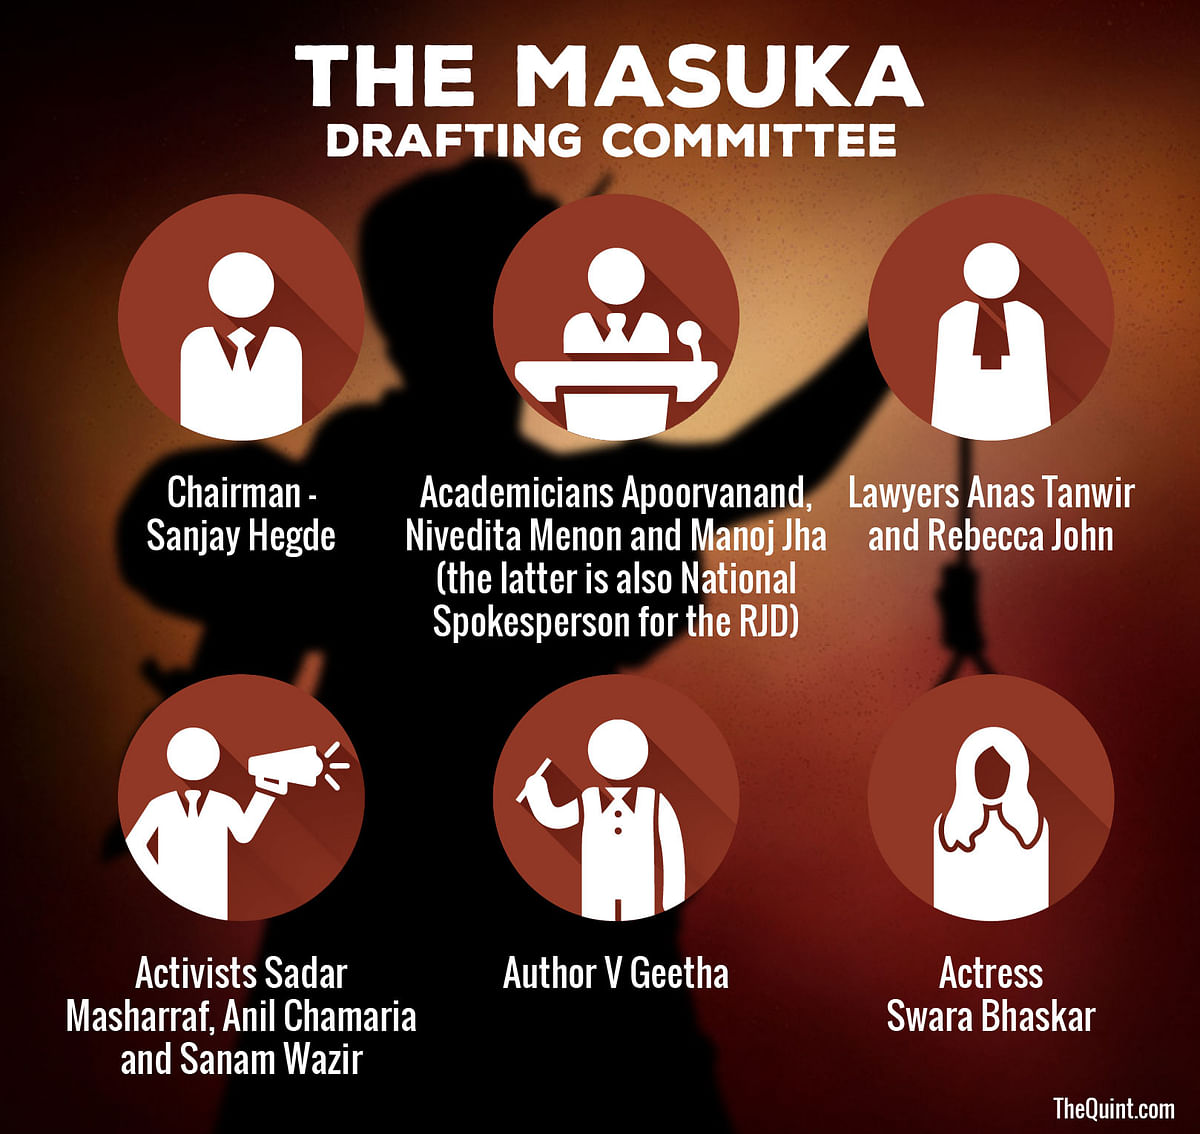 Not sure if #MASUKA will help tackle mob lynchings? The Quint answers your questions about it, and the status quo.